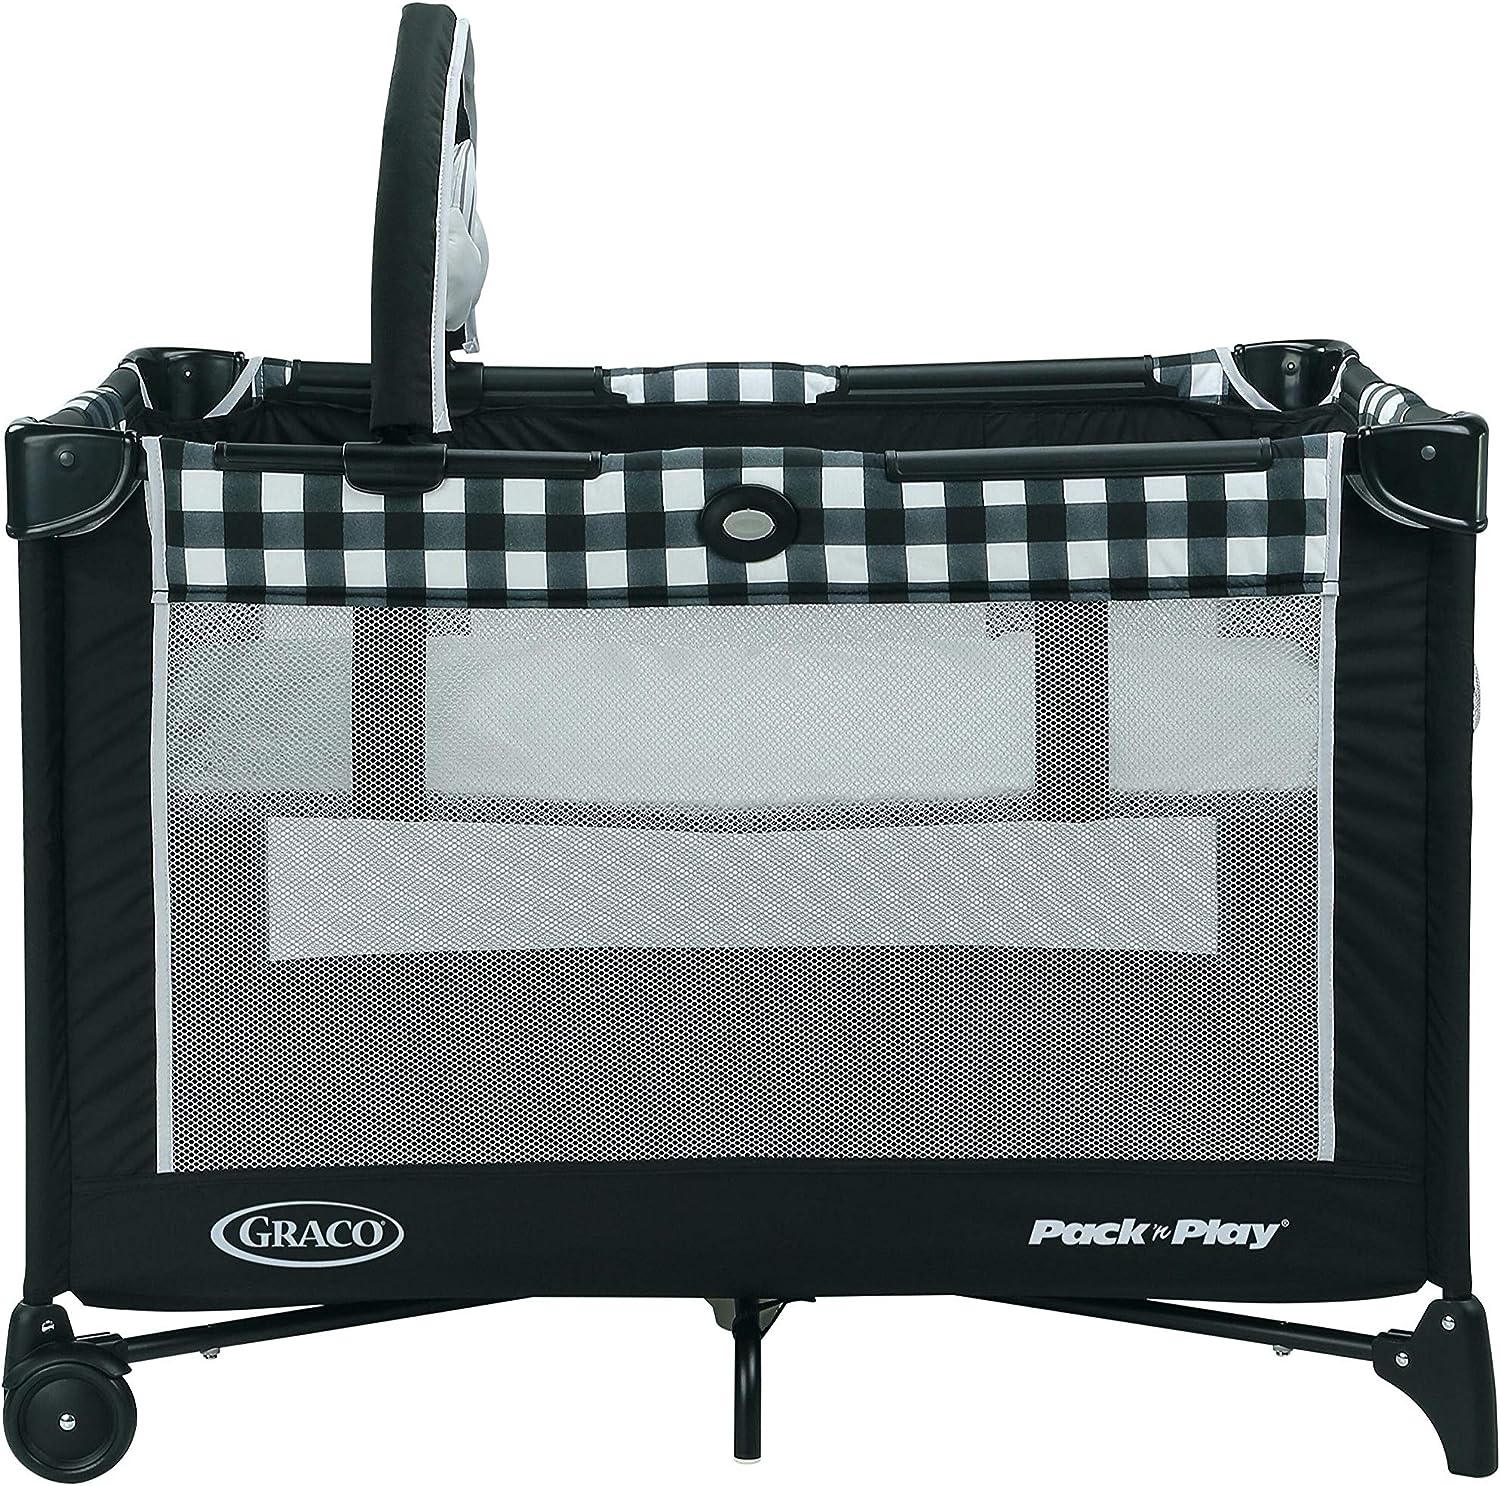 Graco Pack n Play On The Go Portable Playard and Basinet